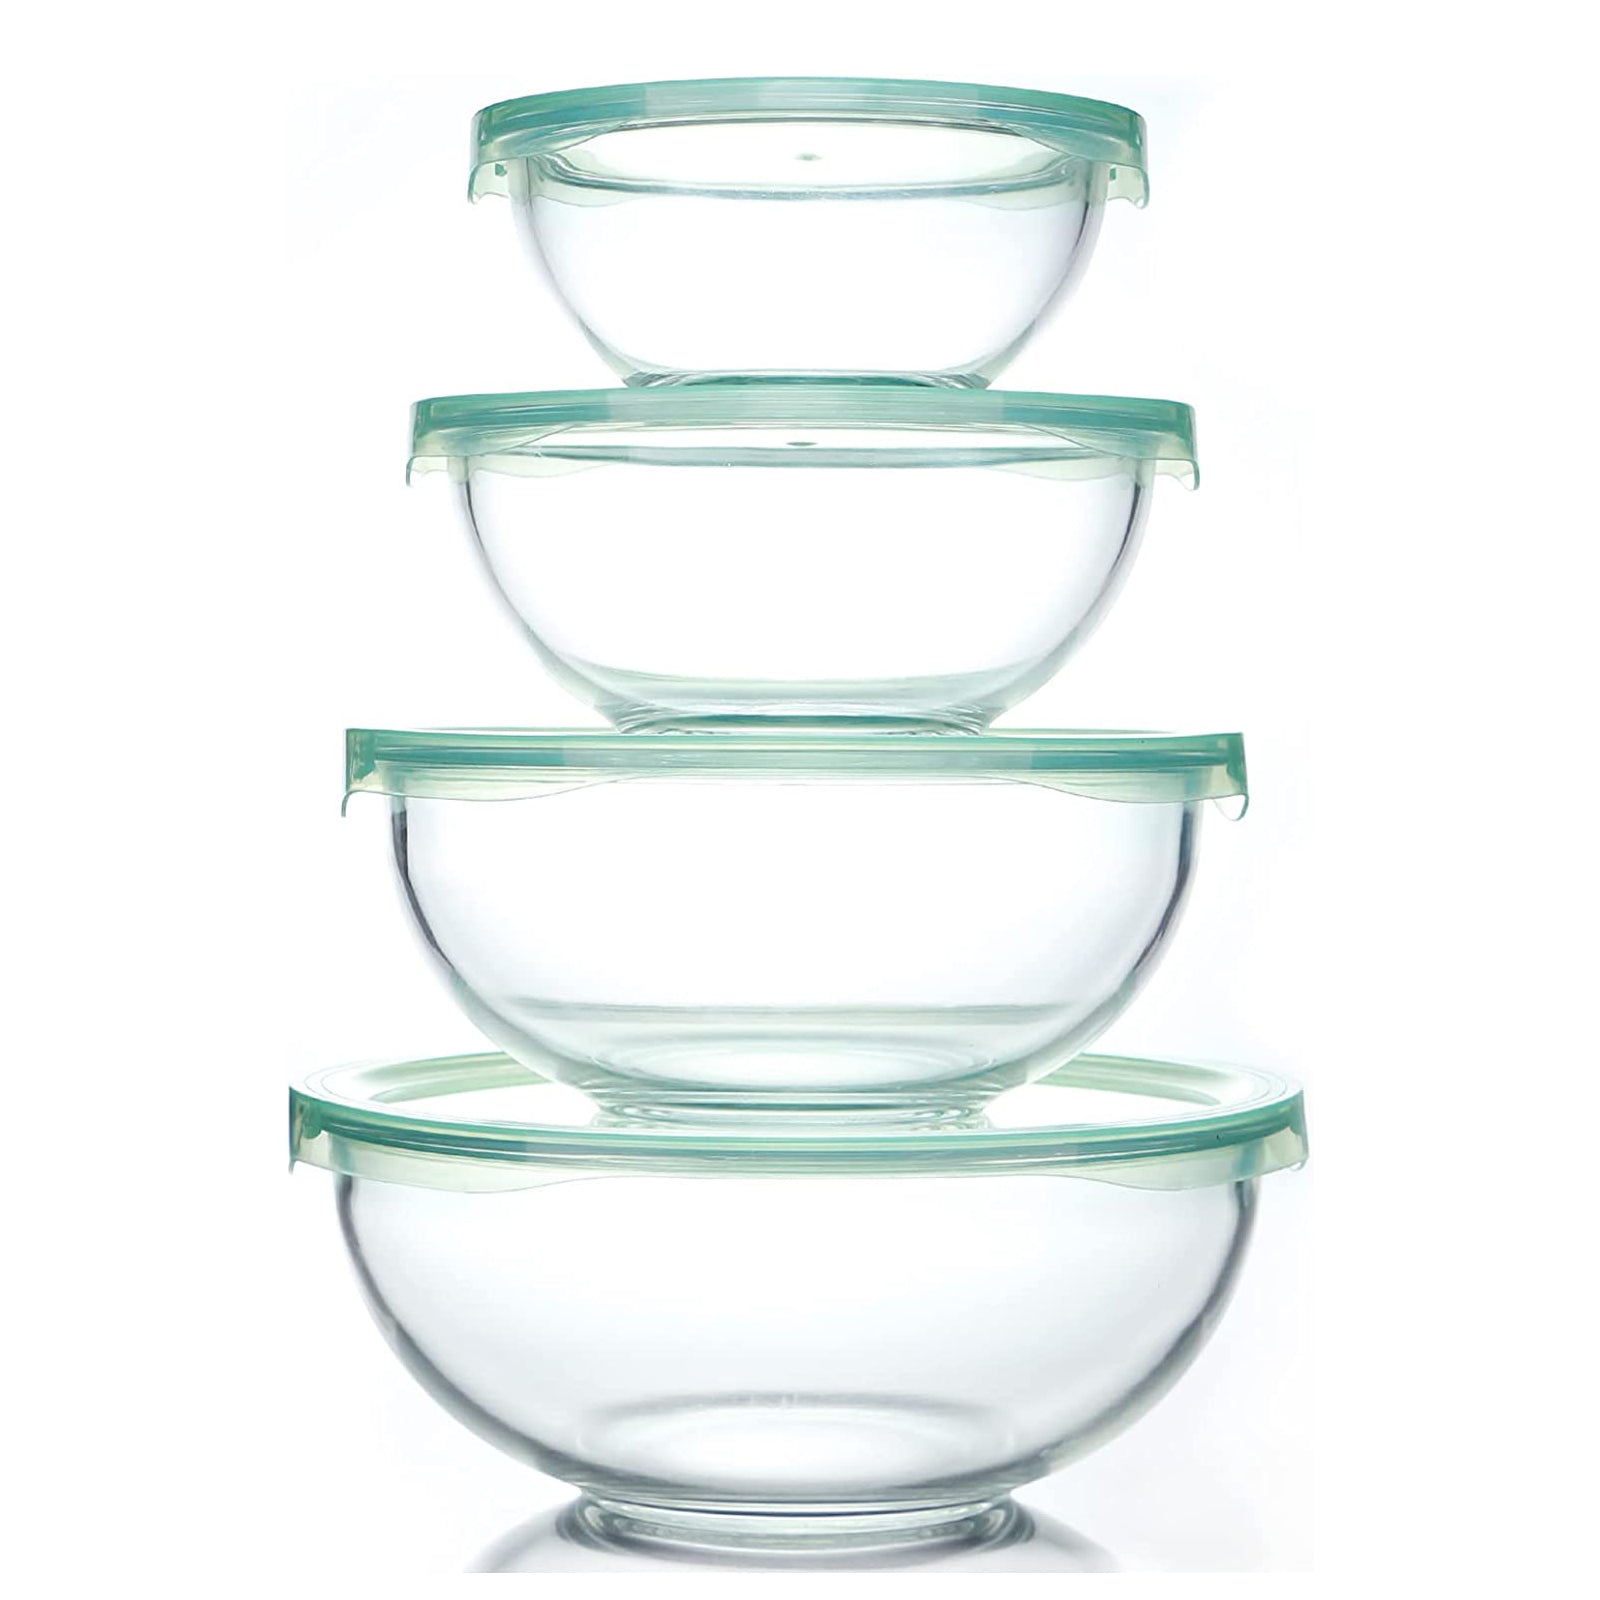 Luvan 3 Piece Glass Nesting Bowl Set - Large Mixing Bowls With Lids for  Kitchen Storage, Cooking, Baking and Prepping (4.5QT, 2.7QT, 1.1QT) 